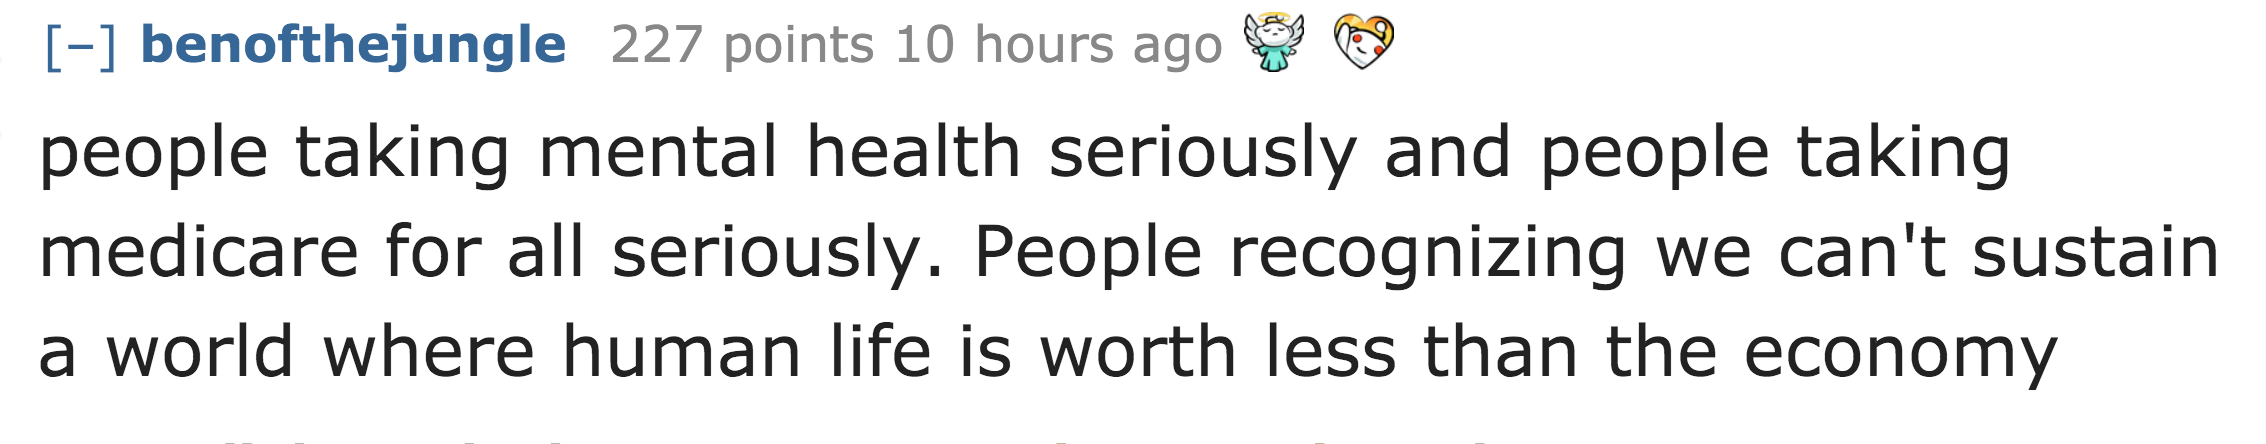 people taking mental health seriously and people taking medicare for all seriously. People recognizing we can't sustain a world where human life is worth less than the economy